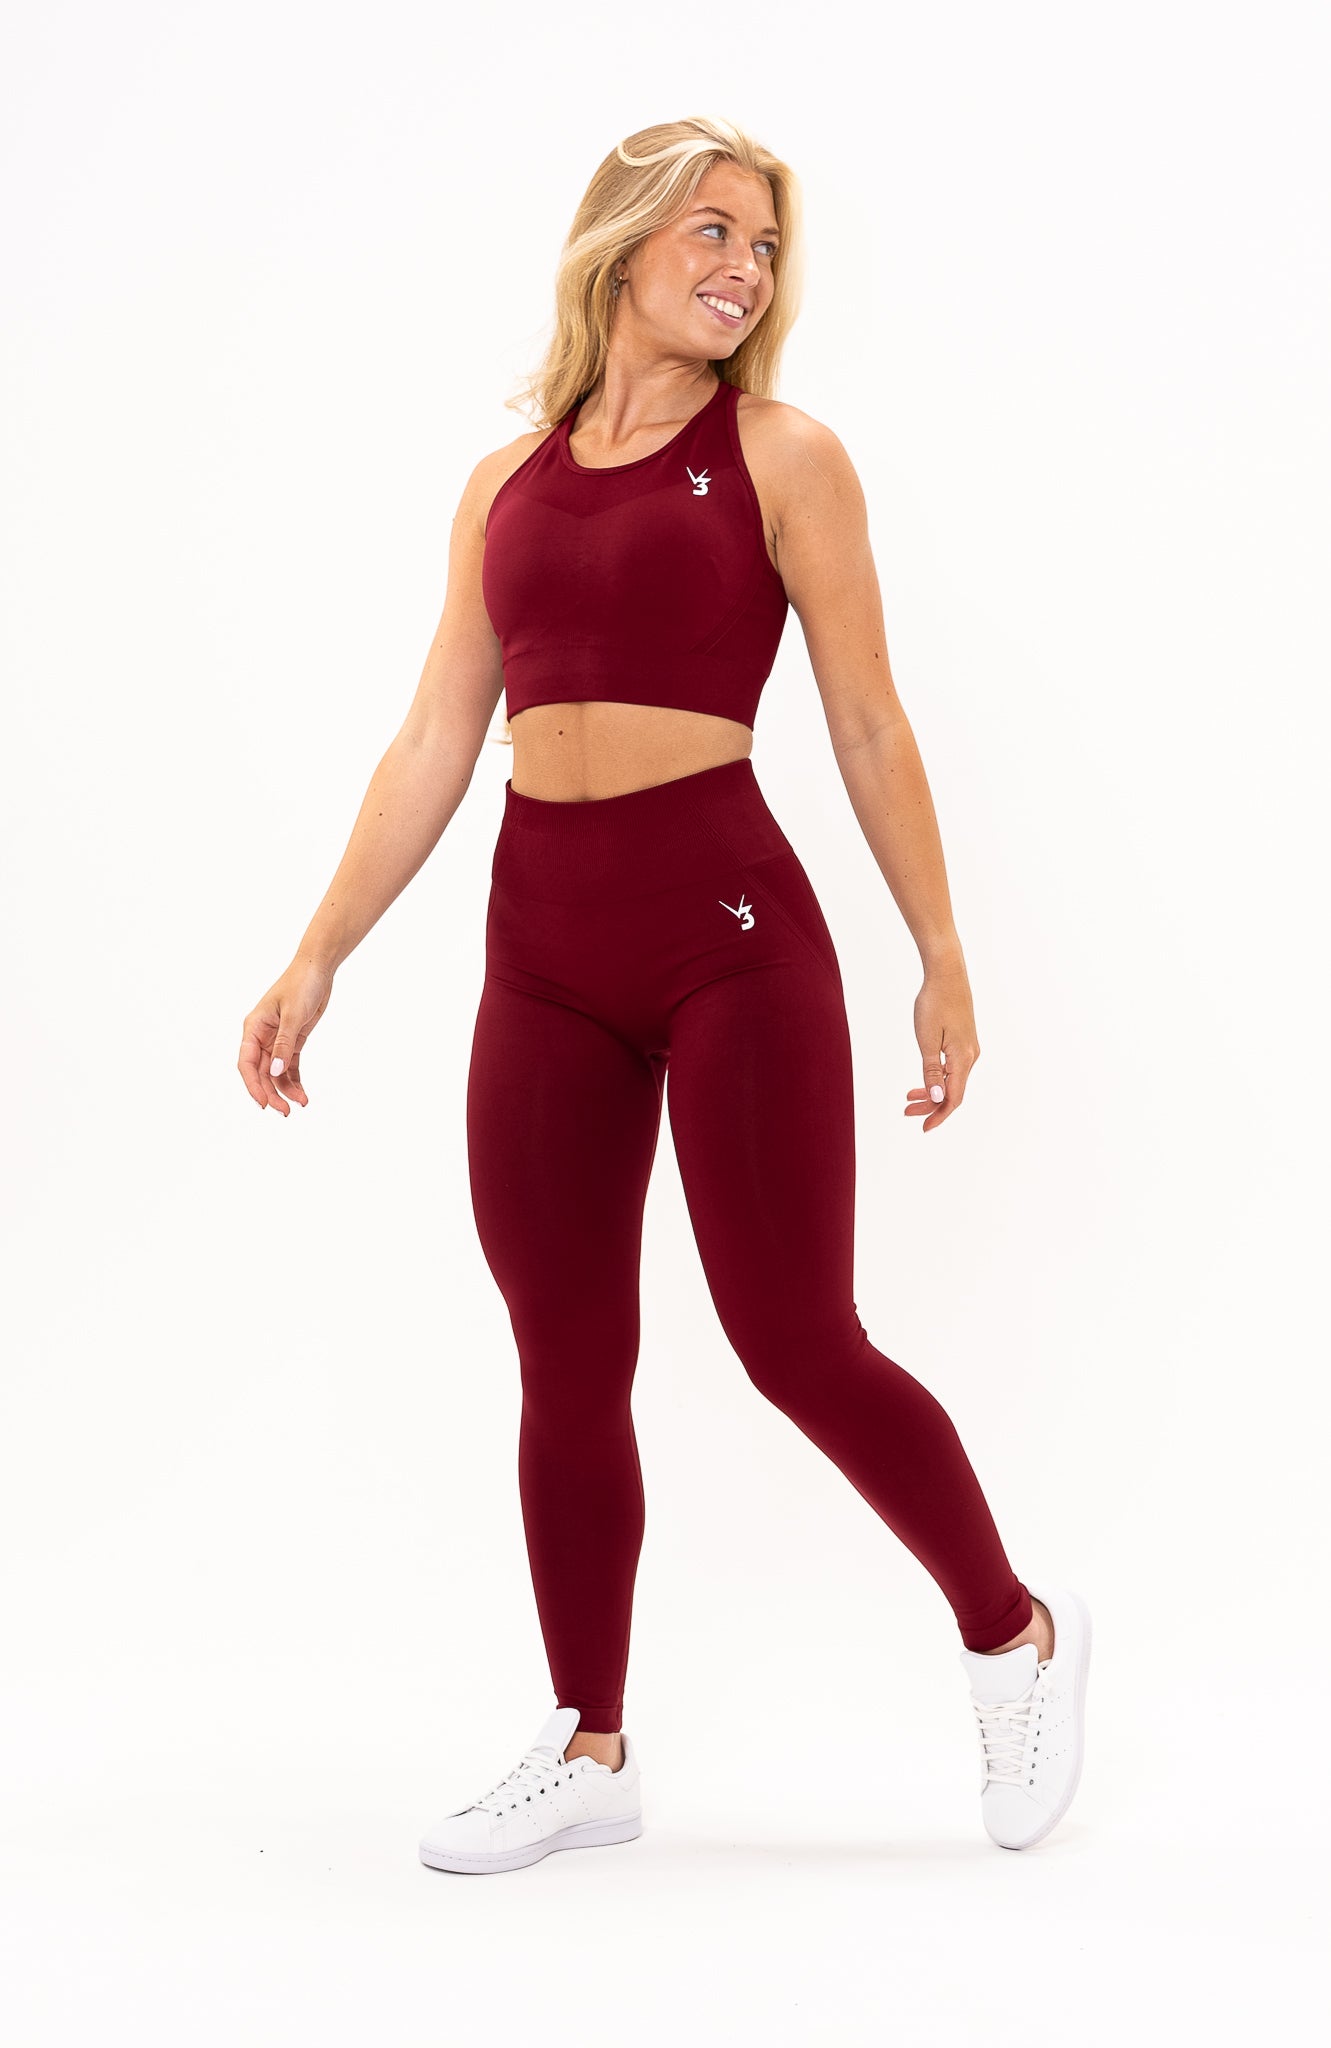 redbaysand Women's Tempo seamless scrunch bum shaping high waisted leggings and training sports bra in burgundy red – Squat proof sports tights and training bra for Gym workouts training, Running, yoga, bodybuilding and bikini fitness.